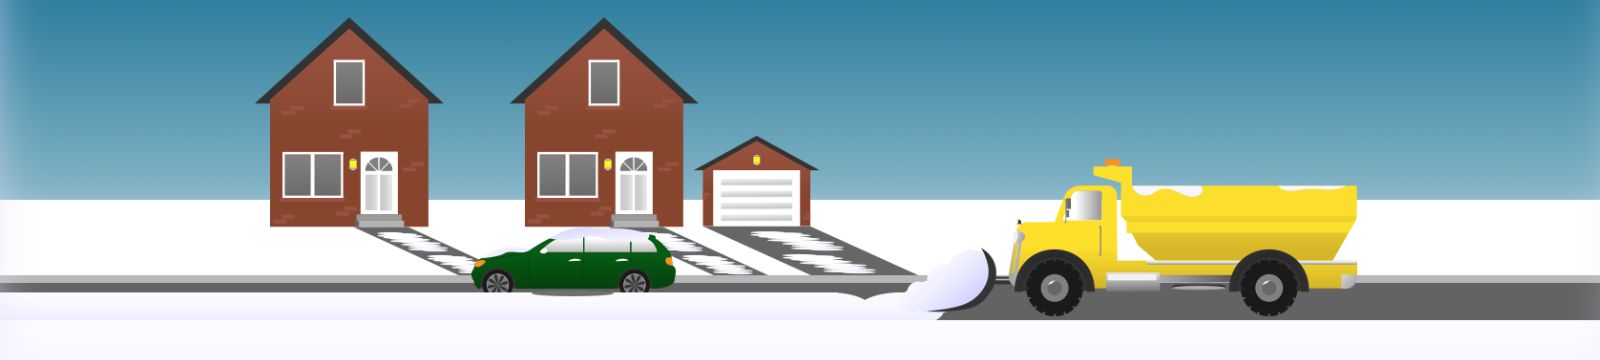 Illustration of snow plow and car parked on the road